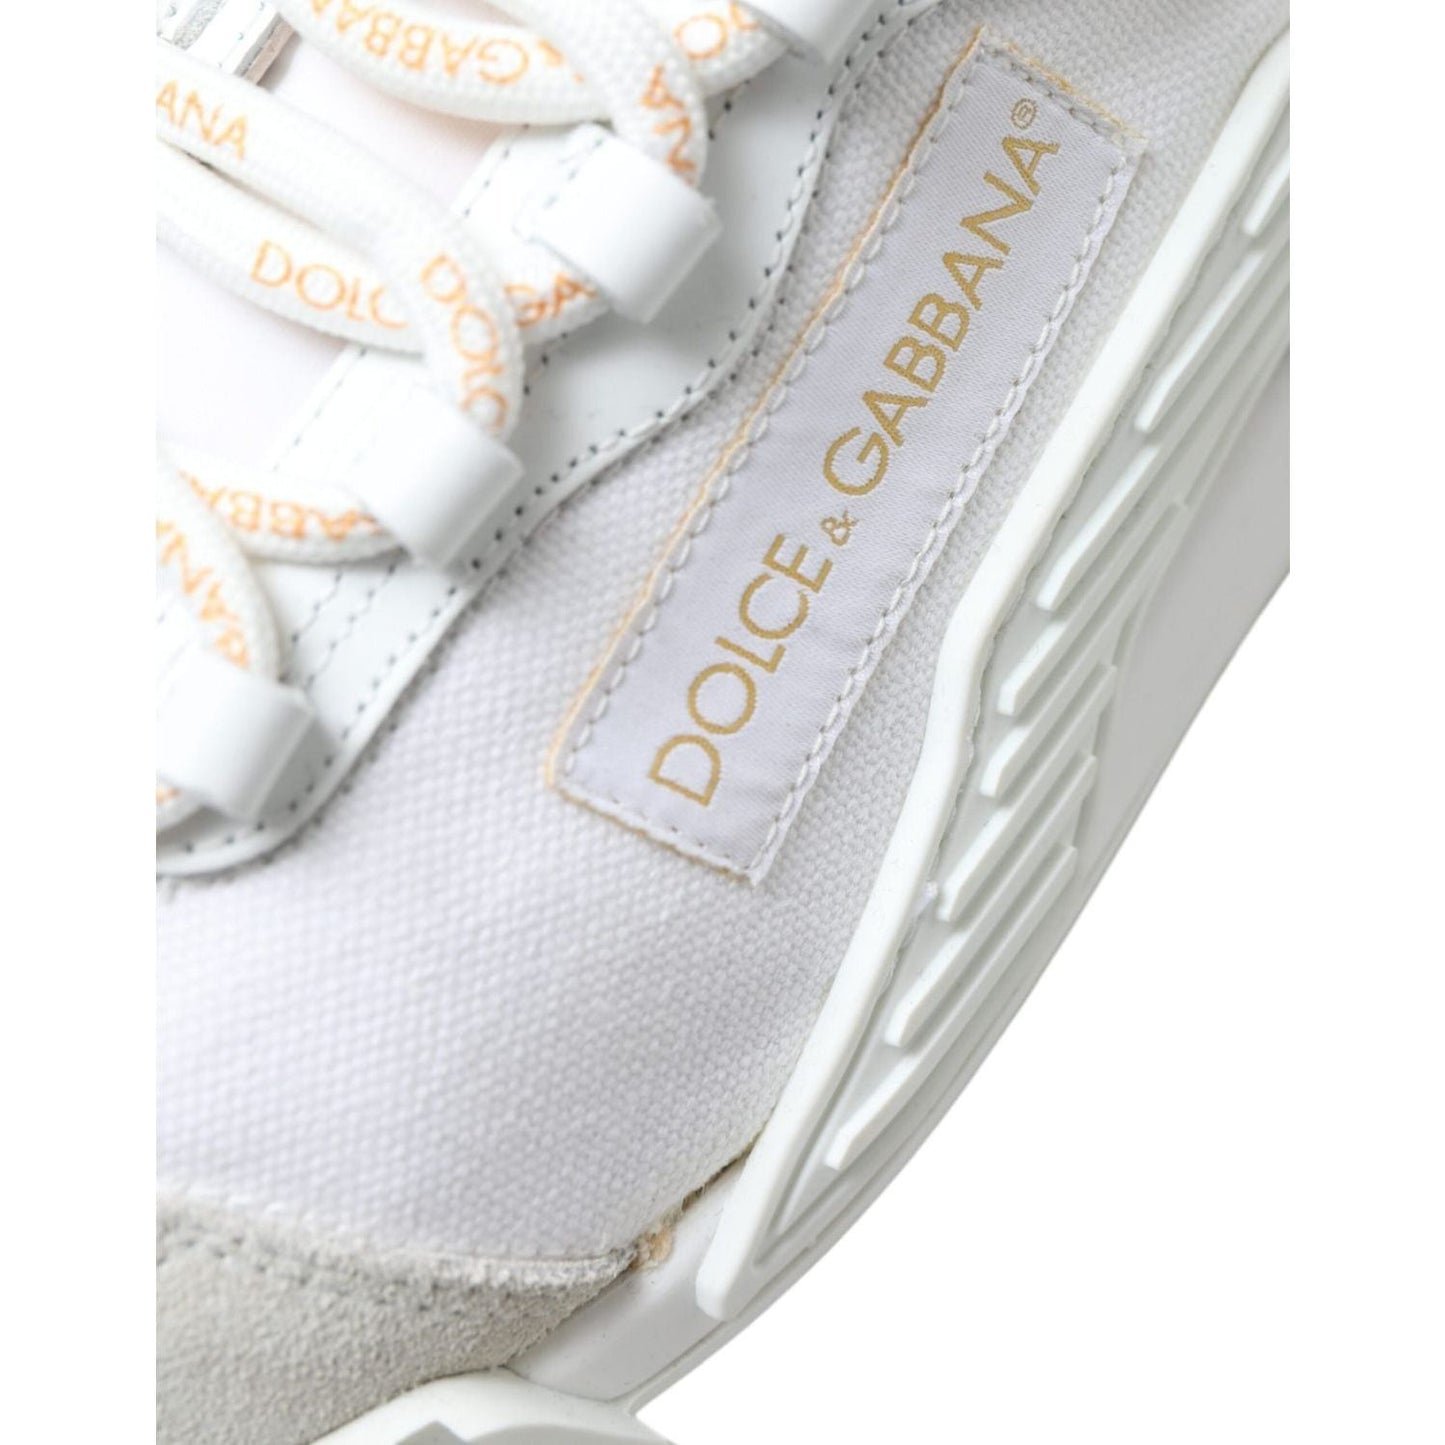 Dolce & Gabbana Elevated White NS1 Sneakers white-ns1-low-top-sports-women-sneakers-shoes 465A2476-BG-scaled-5173ae04-398.jpg